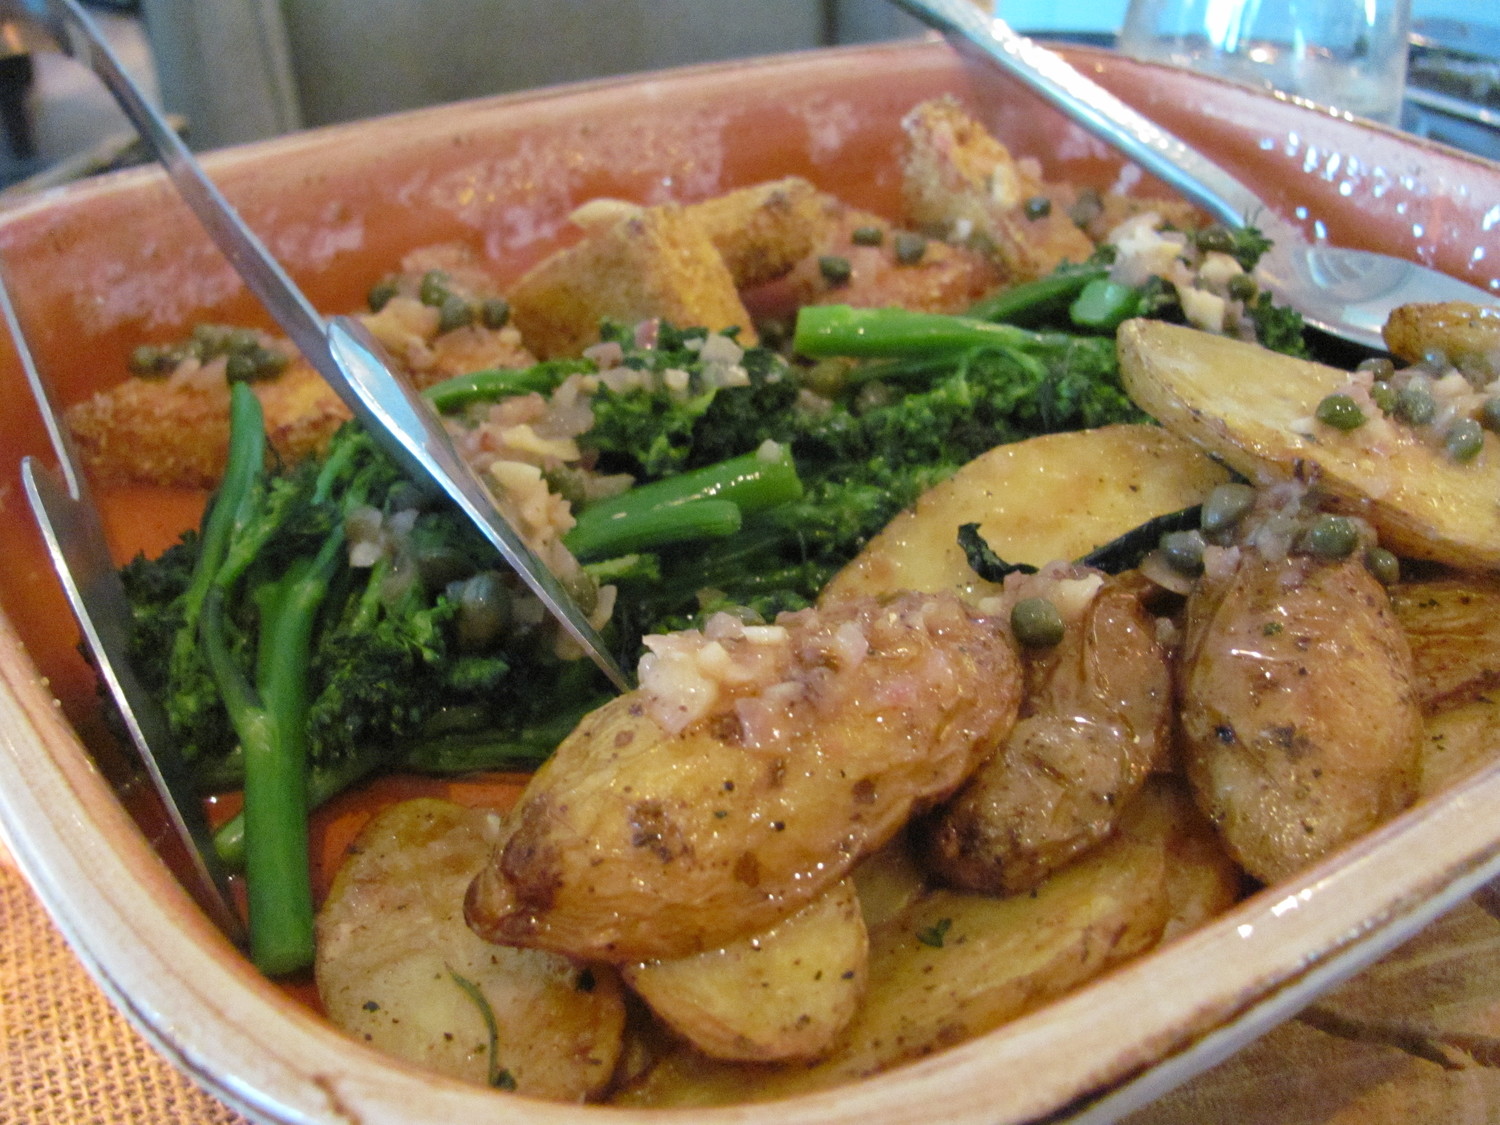 Tofu Piccata with roasted fingerlings and broccolini was one of the courses served at Sawgrass Marriott Golf Resort & Spa’s “Feast for Rabbits” dinner on June 10 at Vernon’s.